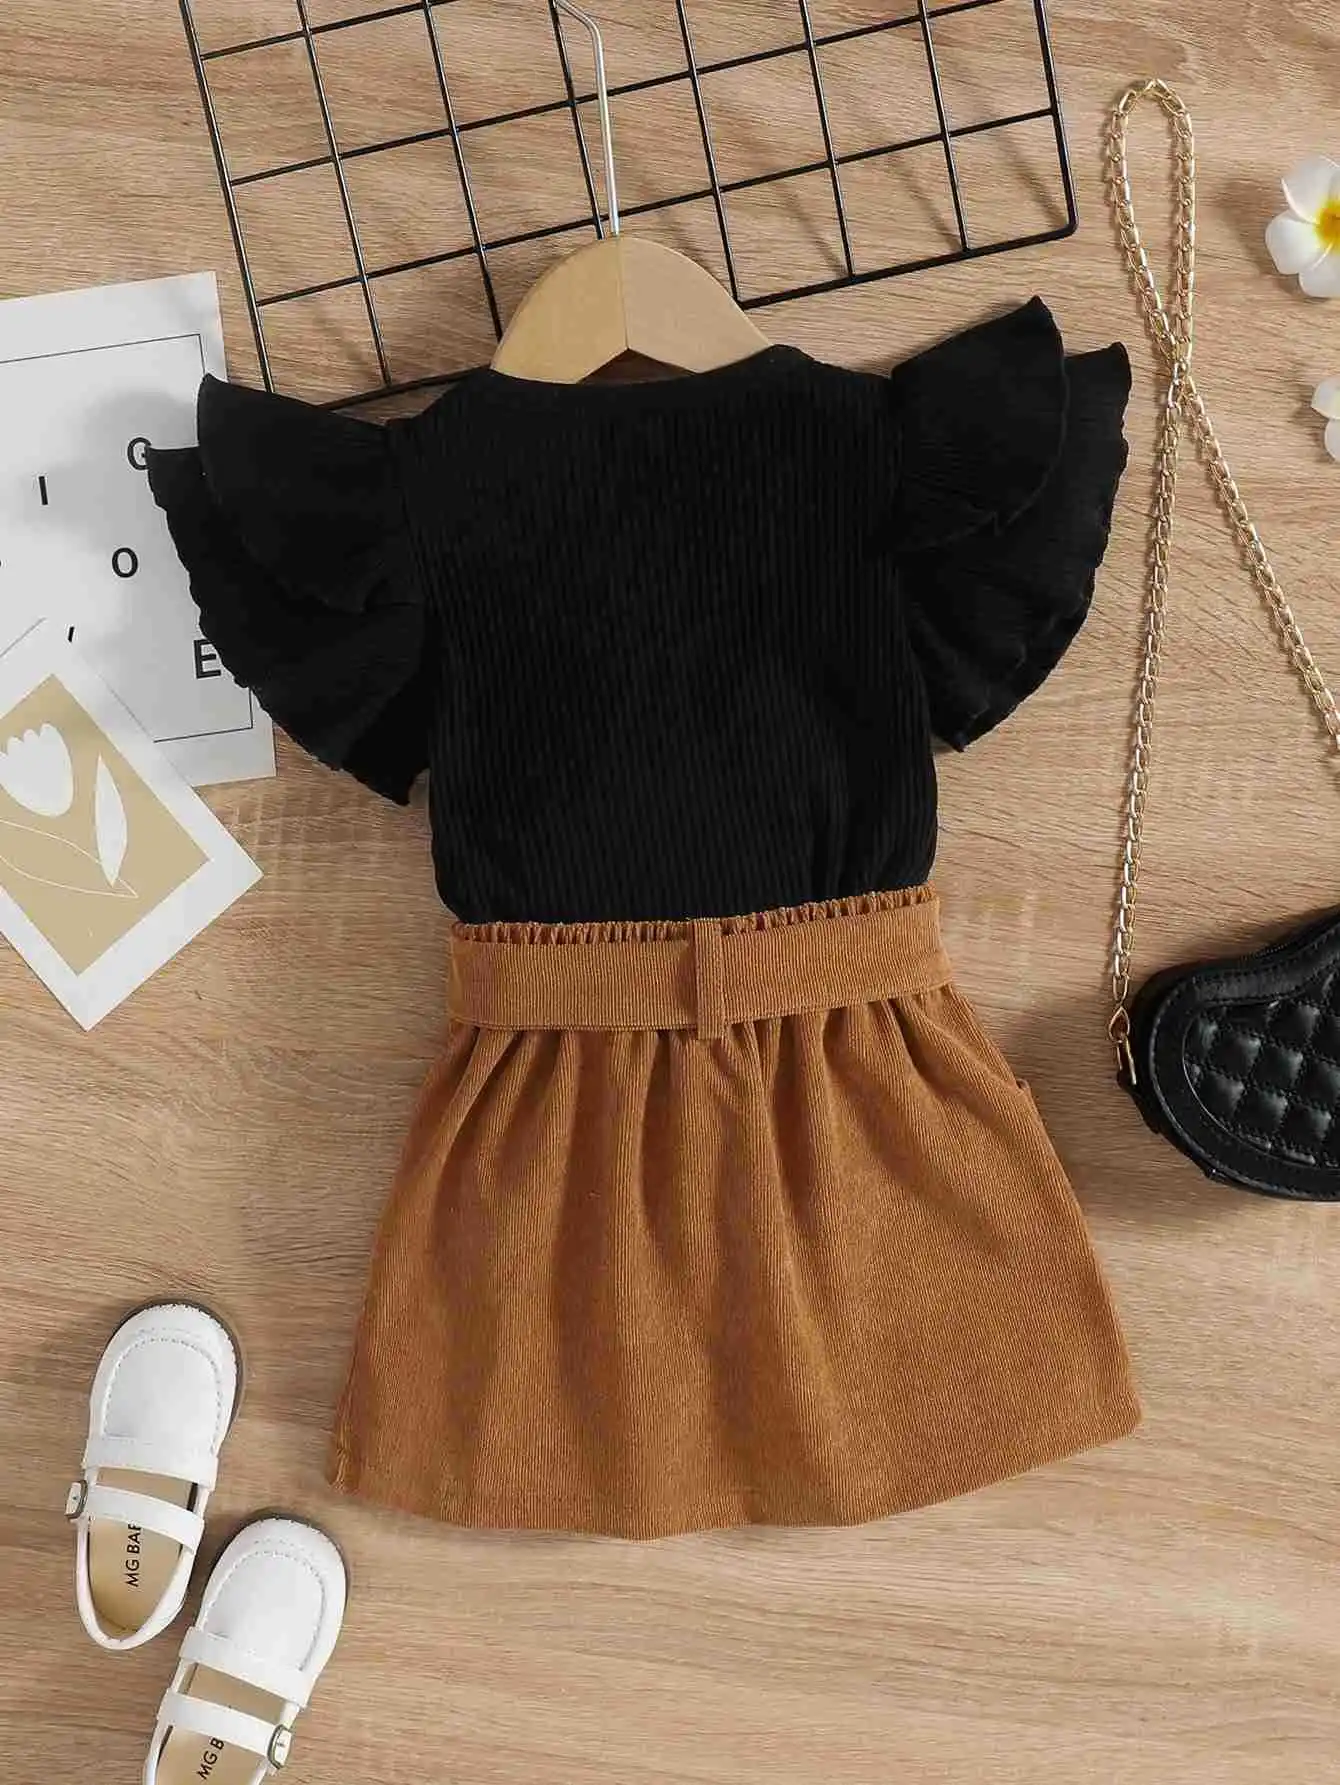 American style children's clothing summer flying sleeve pit top+corduroy skirt boutique two-piece girls outfits